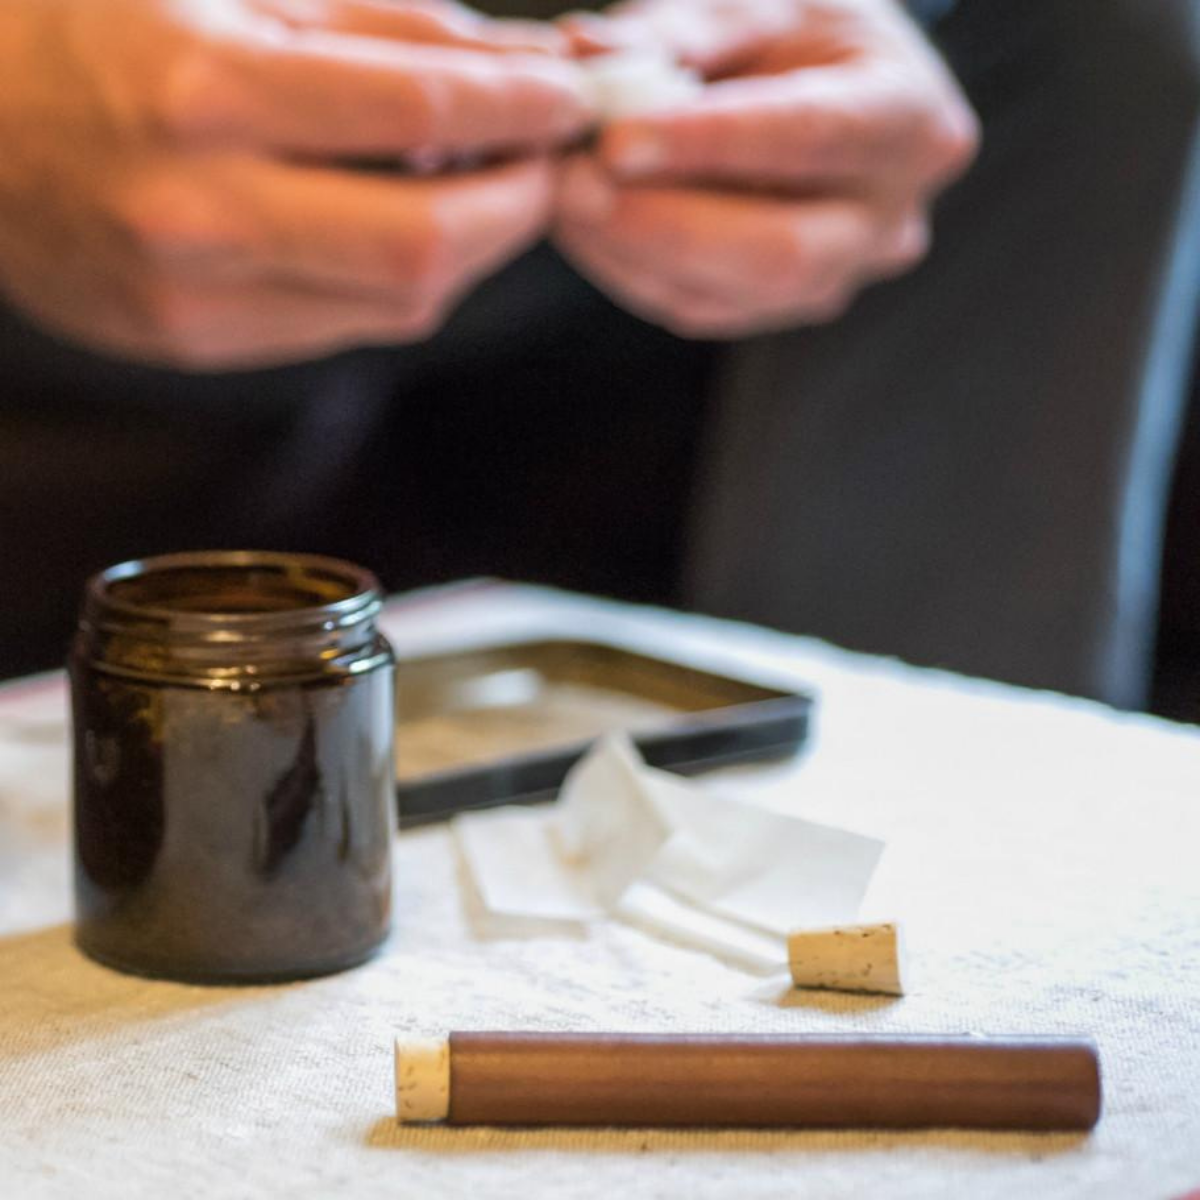 Capless handroll cigarette tube next to glass jar of herbs and rolling tray